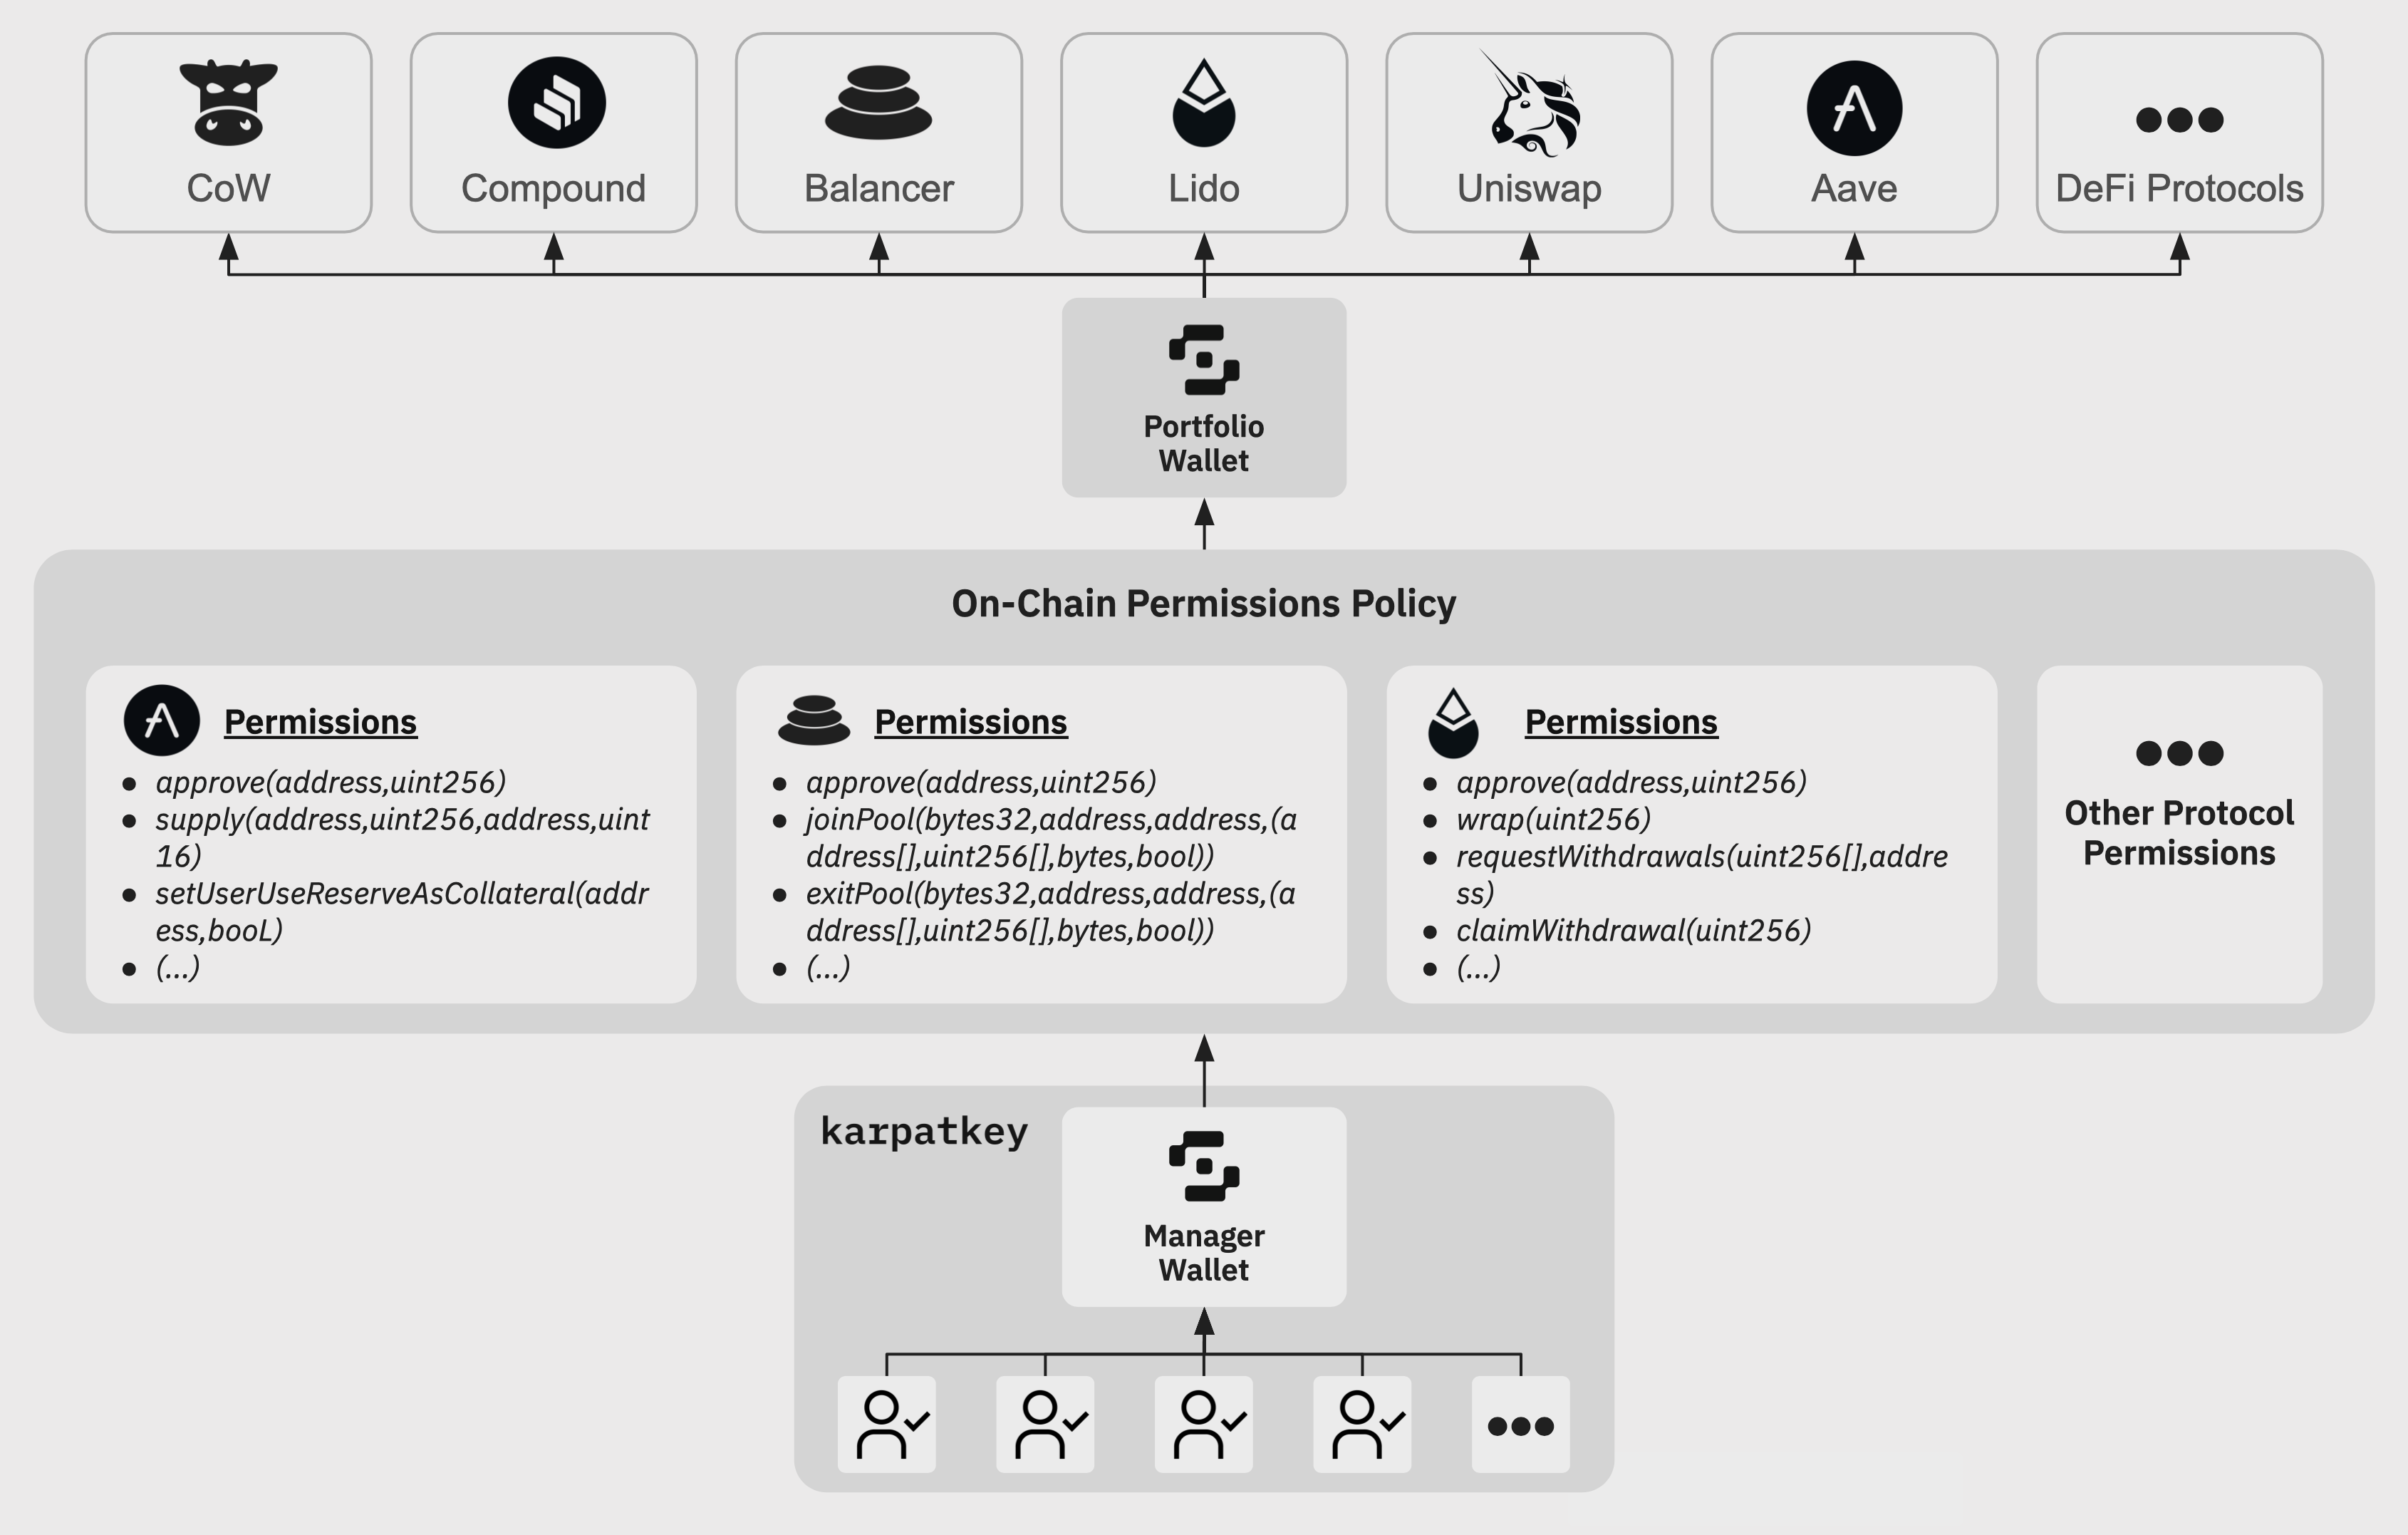 Overview of karpatkey's use of on-chain permissions policies for non-custodial portfolio management.